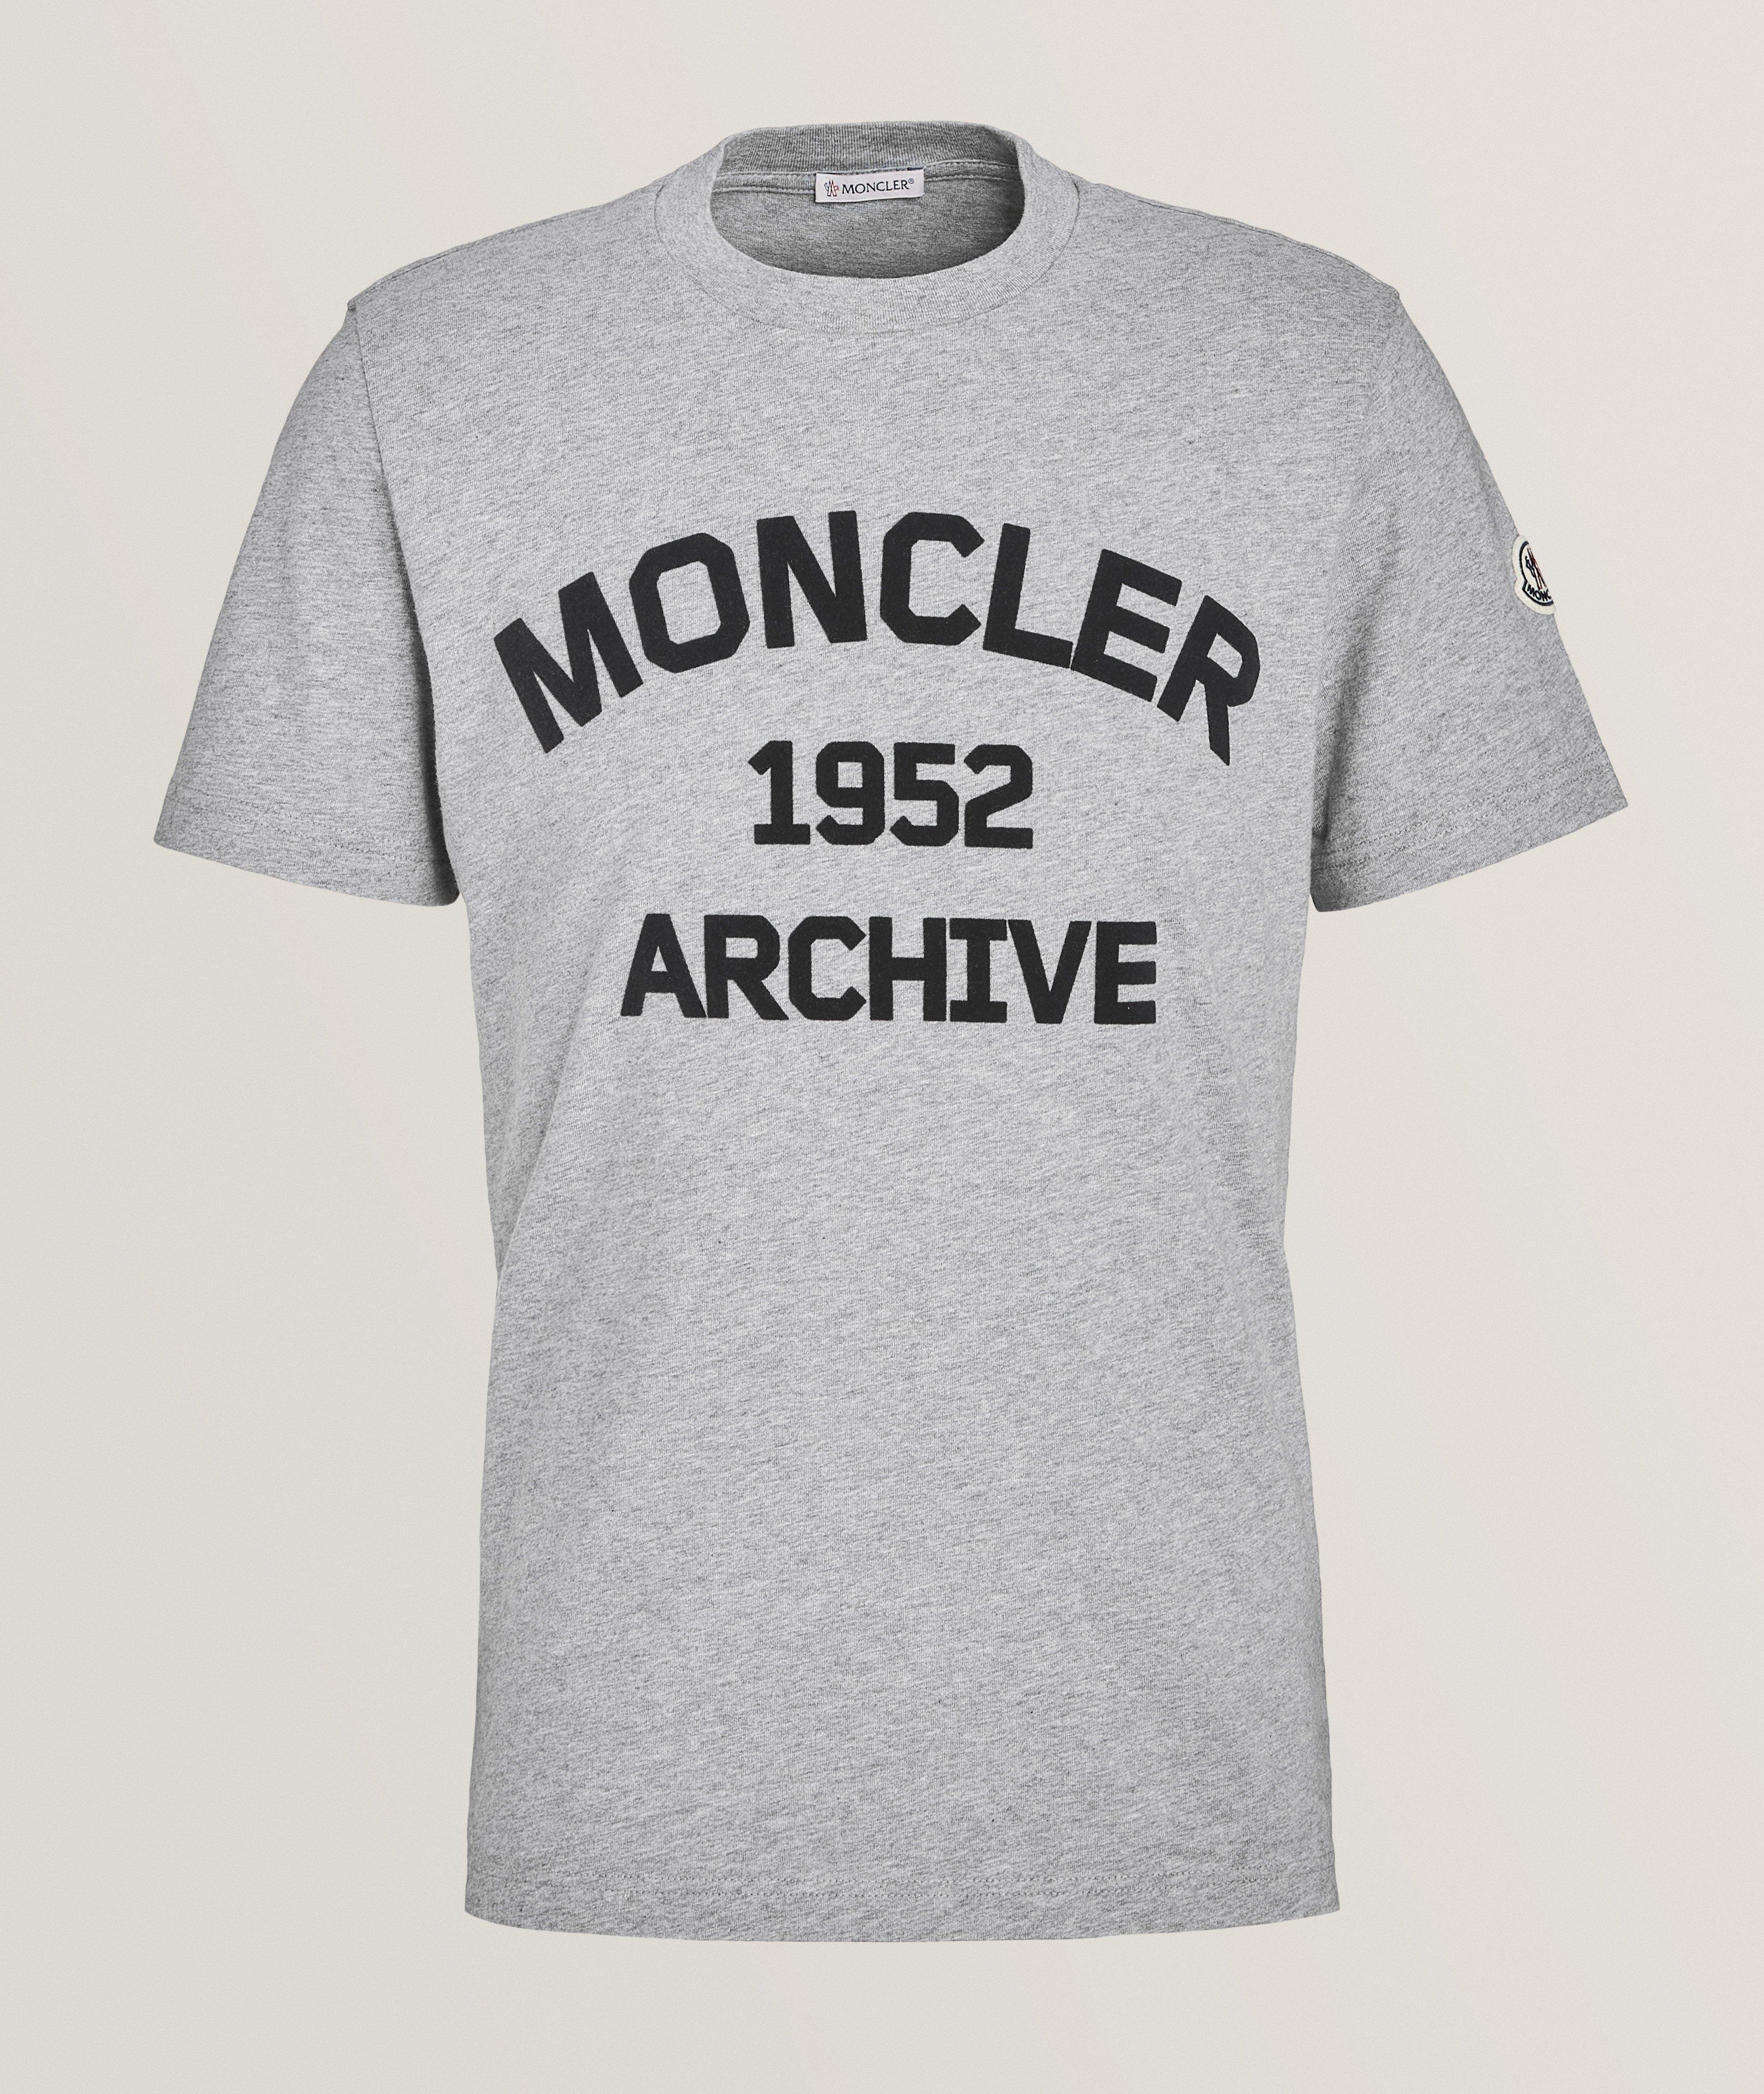 T-shirt, collection d’archives image 0